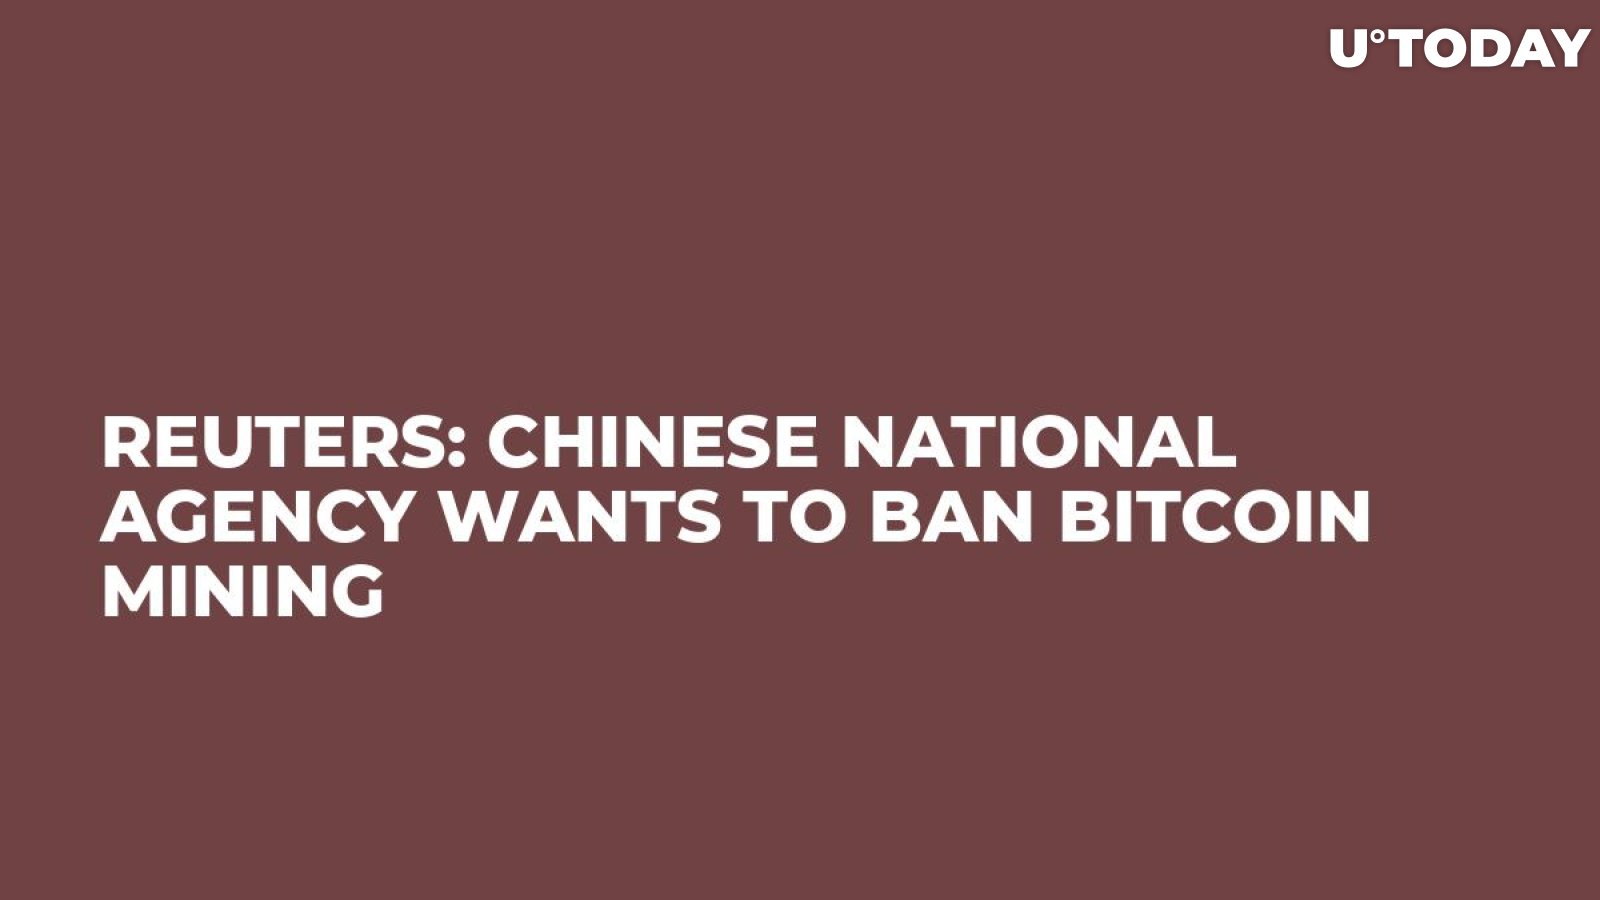 Reuters: Chinese National Agency Wants to Ban Bitcoin Mining